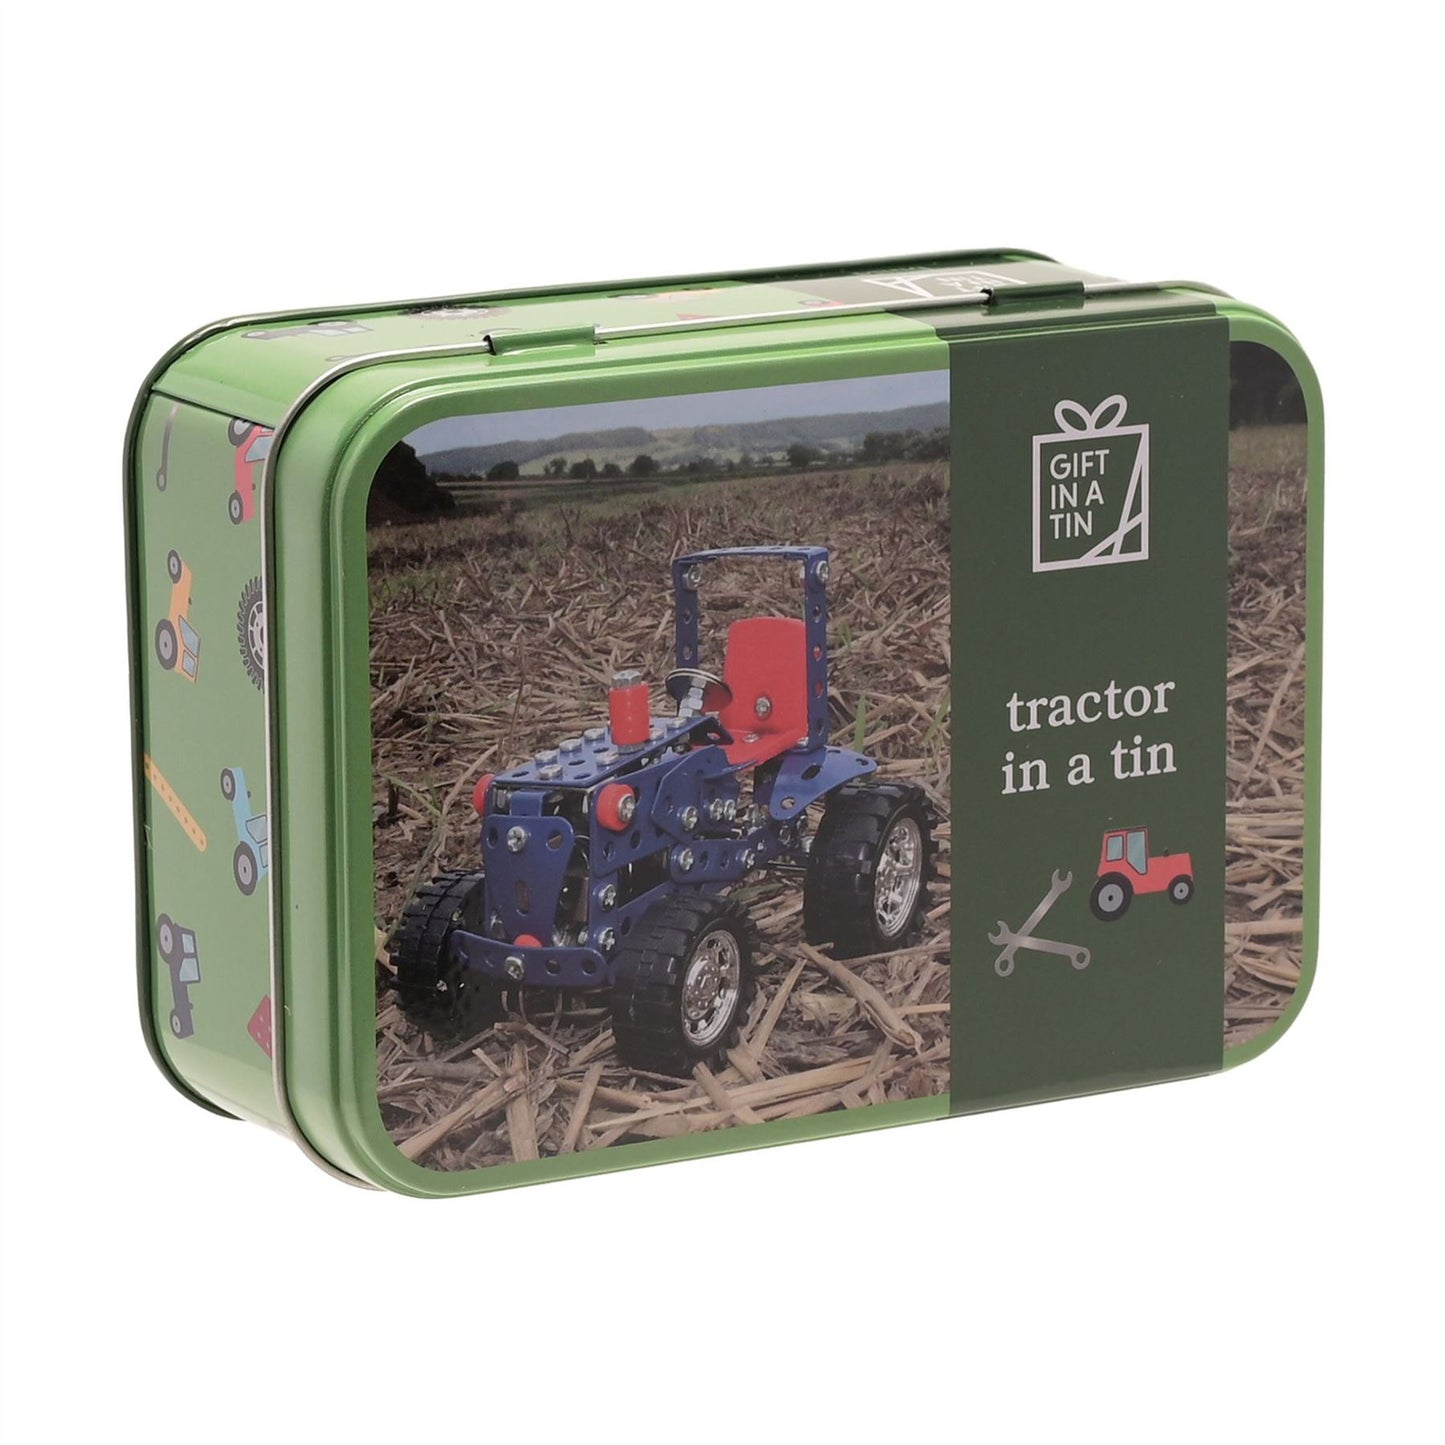 Apples To Pears Gift In A Tin Tractor